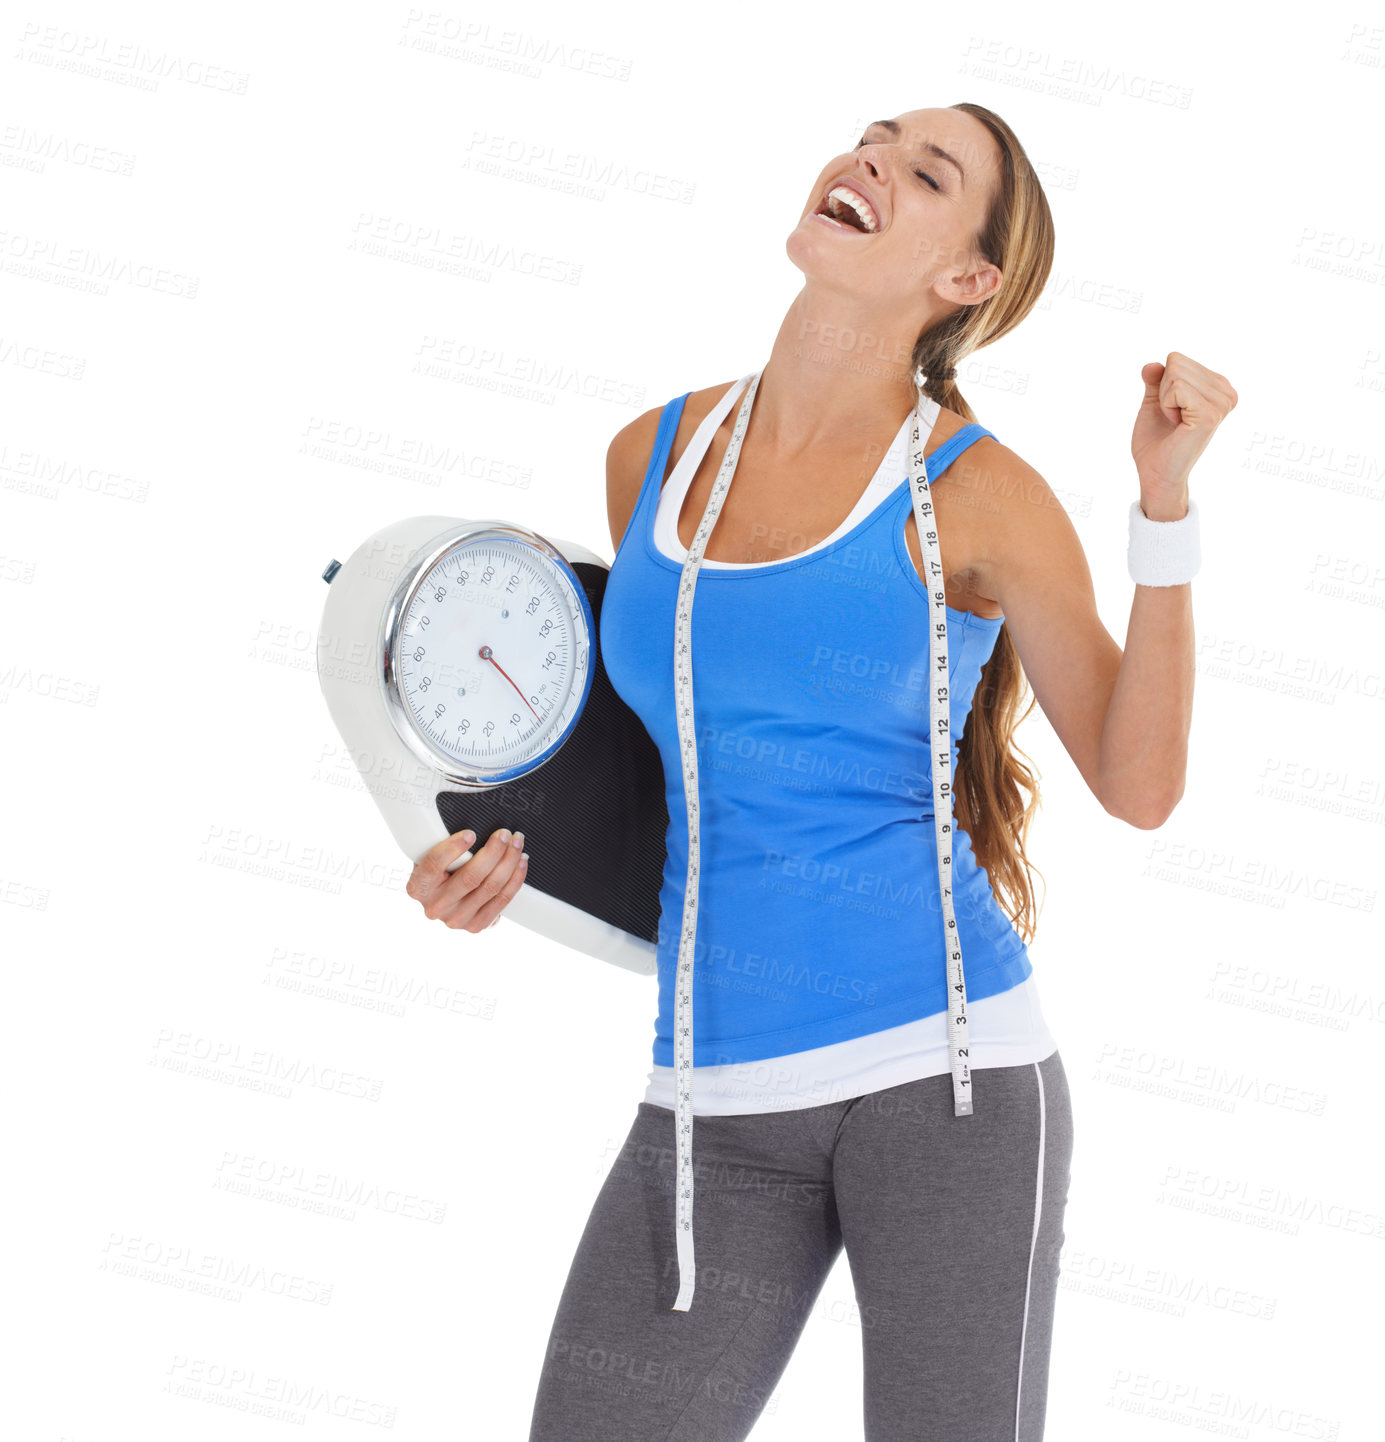 Buy stock photo Young woman in sportswear holding a scale and smiling while isolated on white